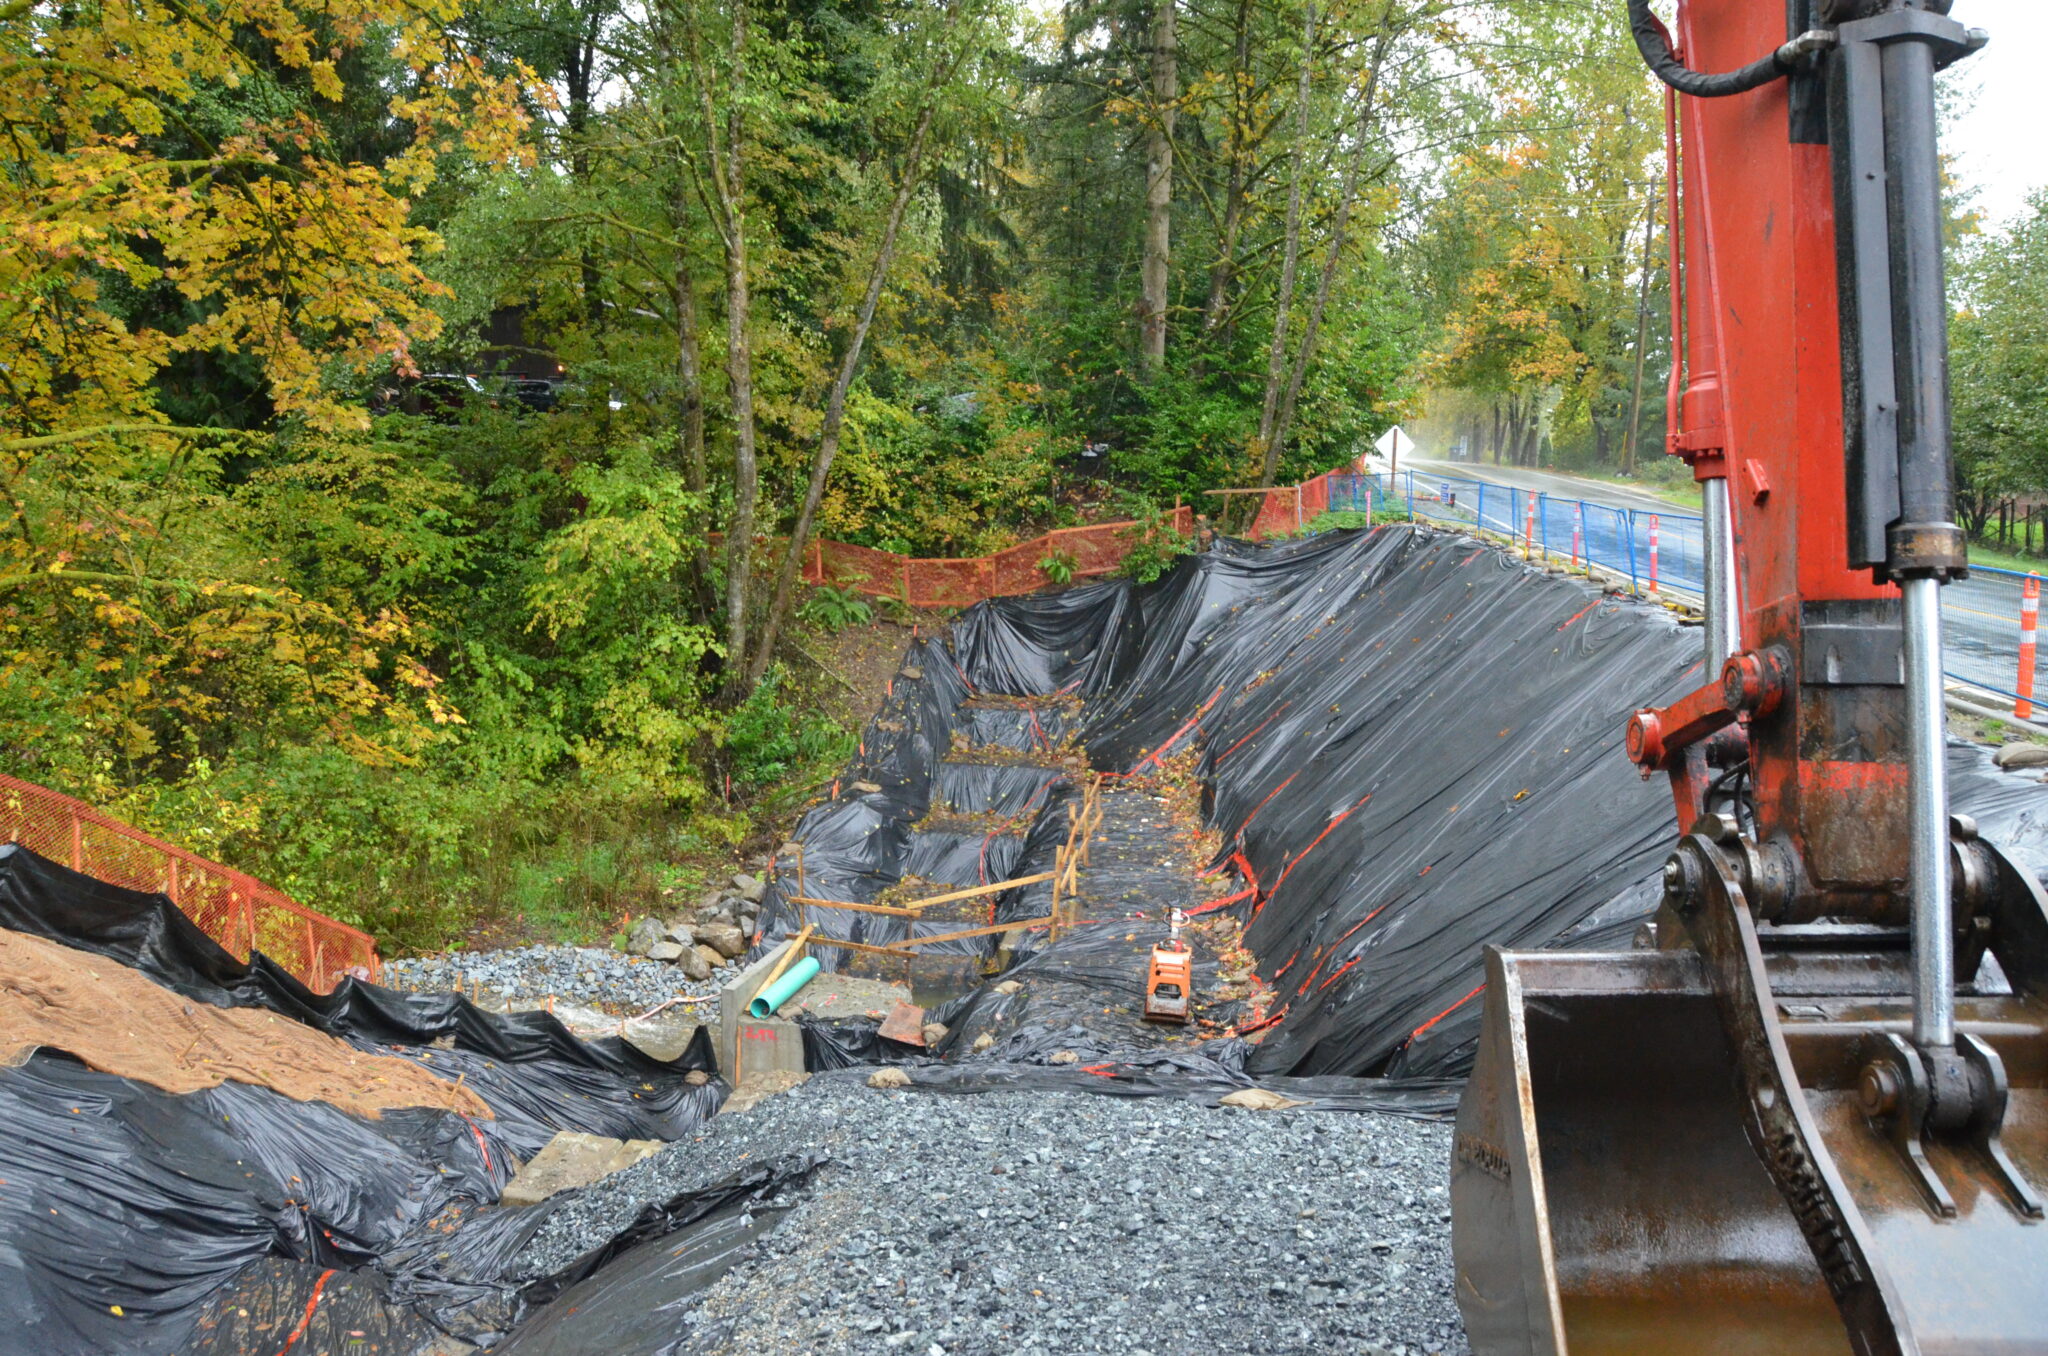 Retaining Wall To Accommodate Road Widening